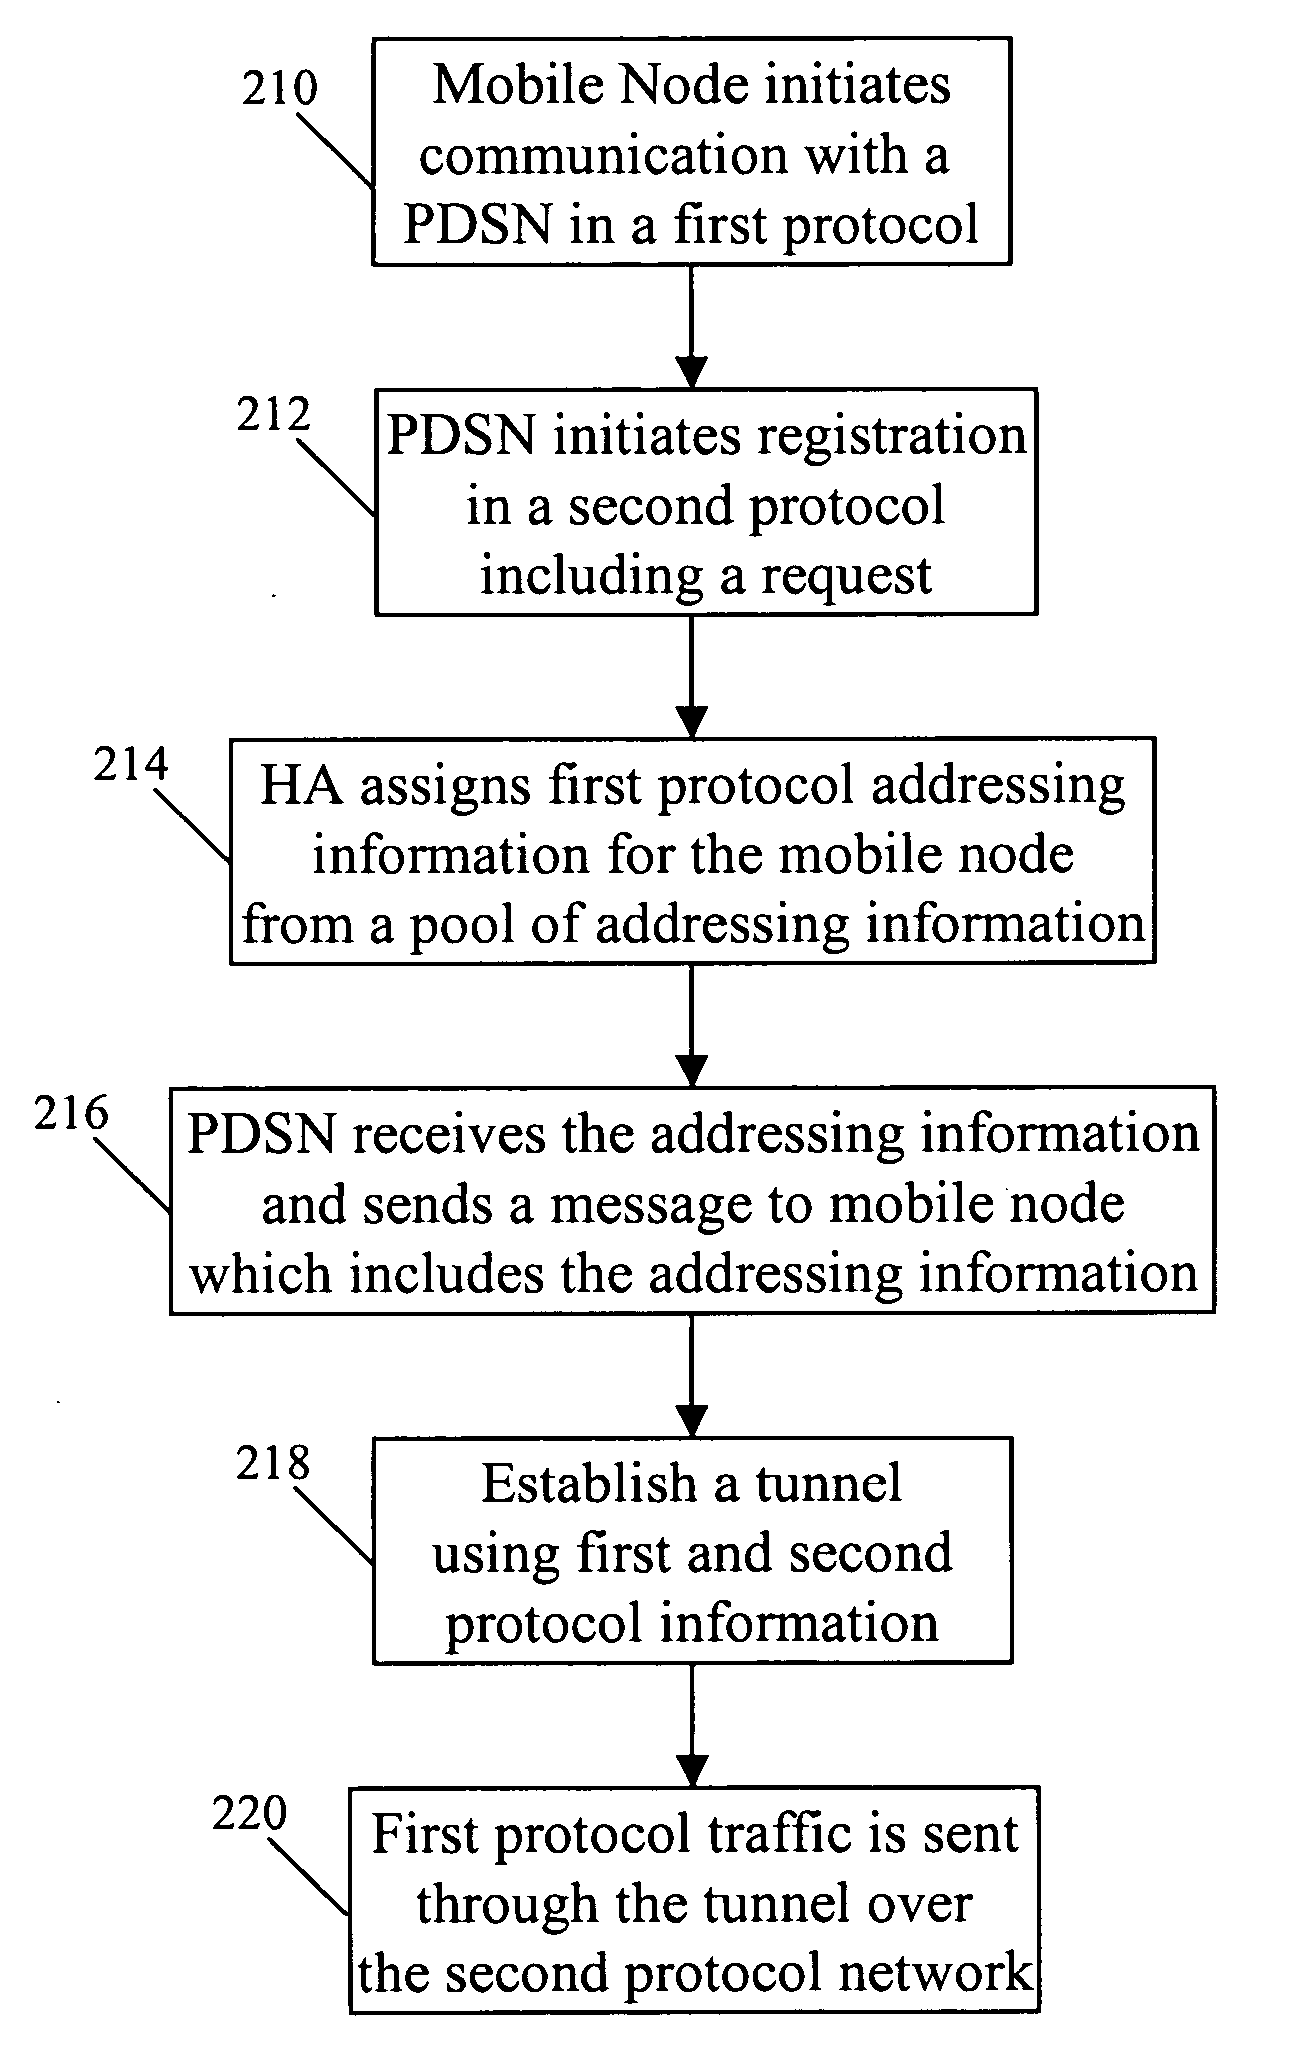 Internet protocol tunneling on a mobile network